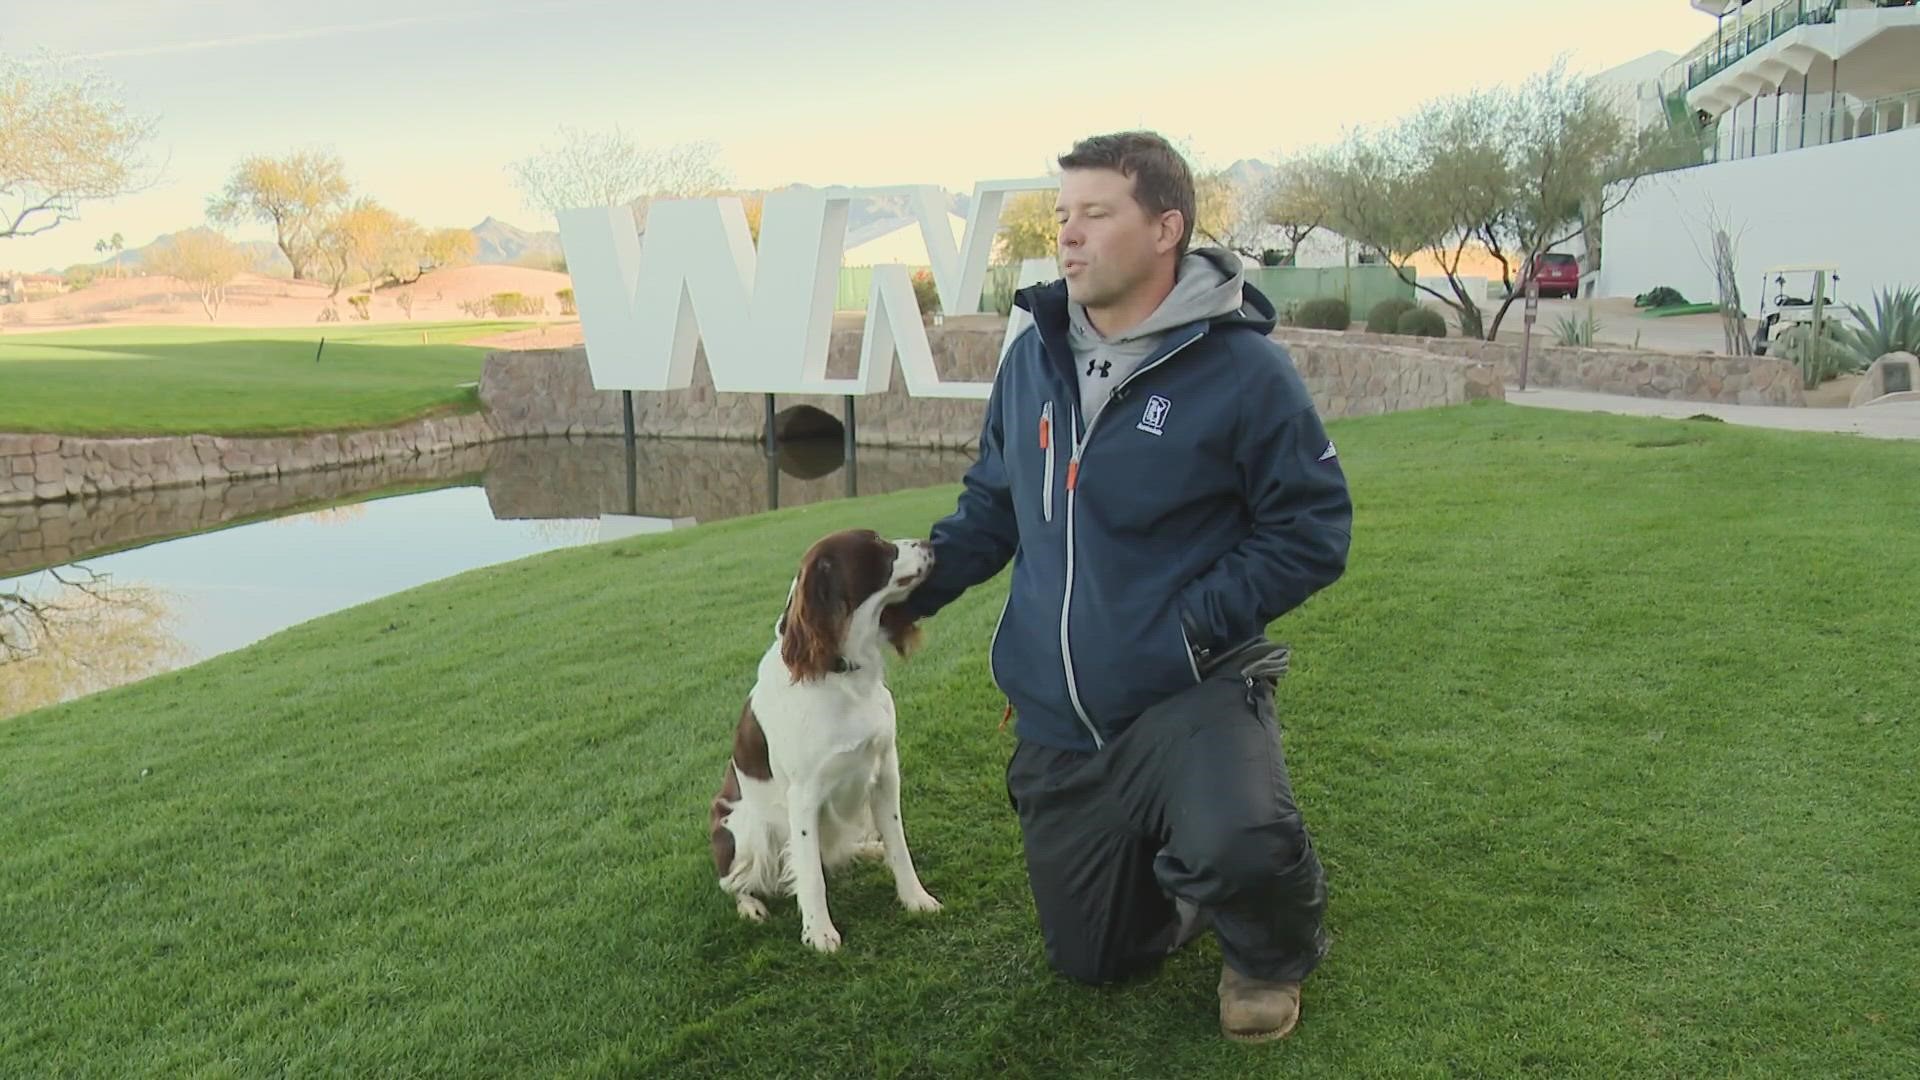 Rye is a cute 3-year-old dog with one very important job. See how she helps keep birds and other critters off the grass at the TPC Scottsdale.